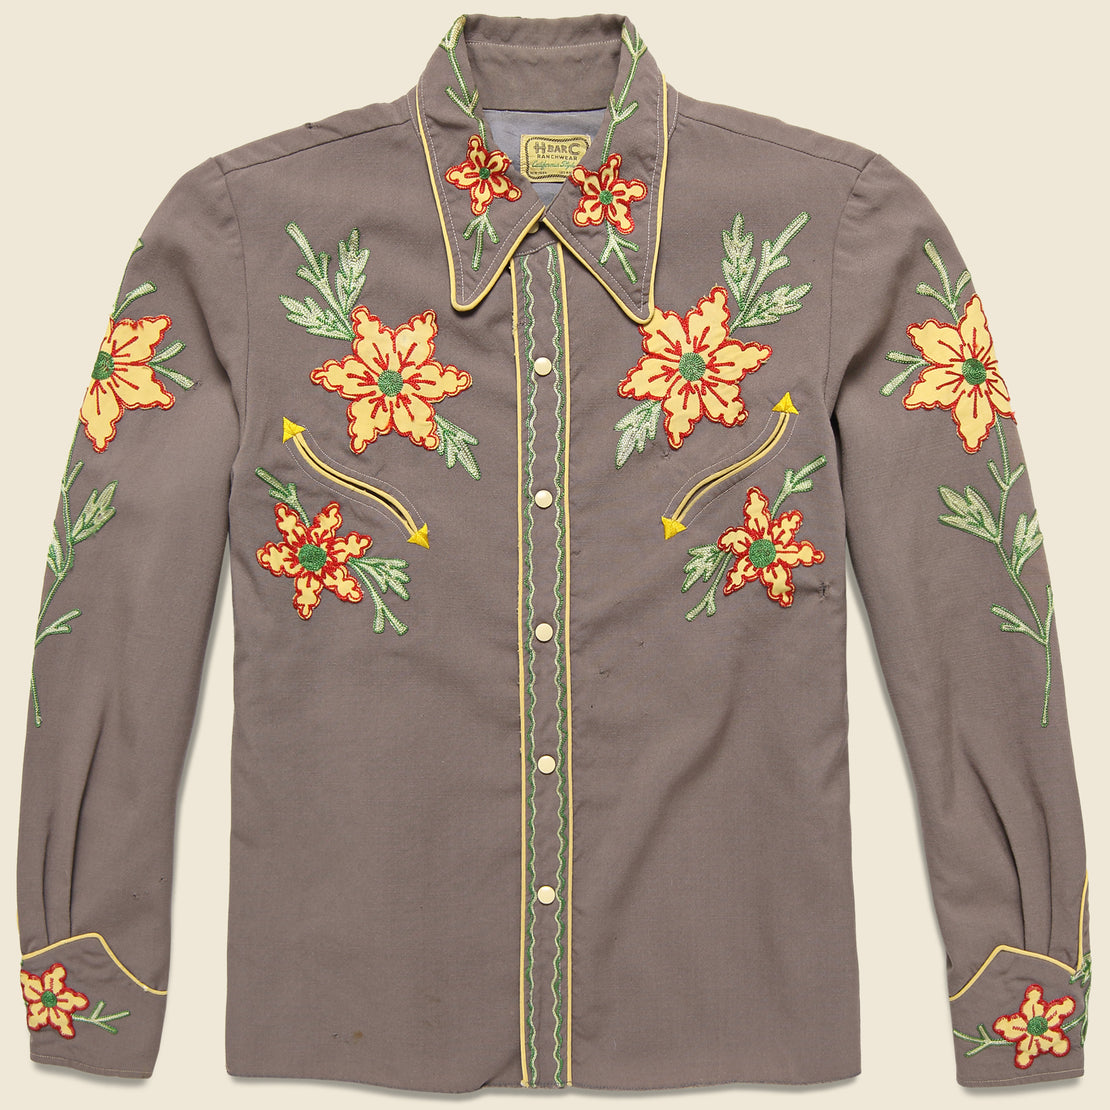 Vintage HBarC Shirt - Brown with Flowers